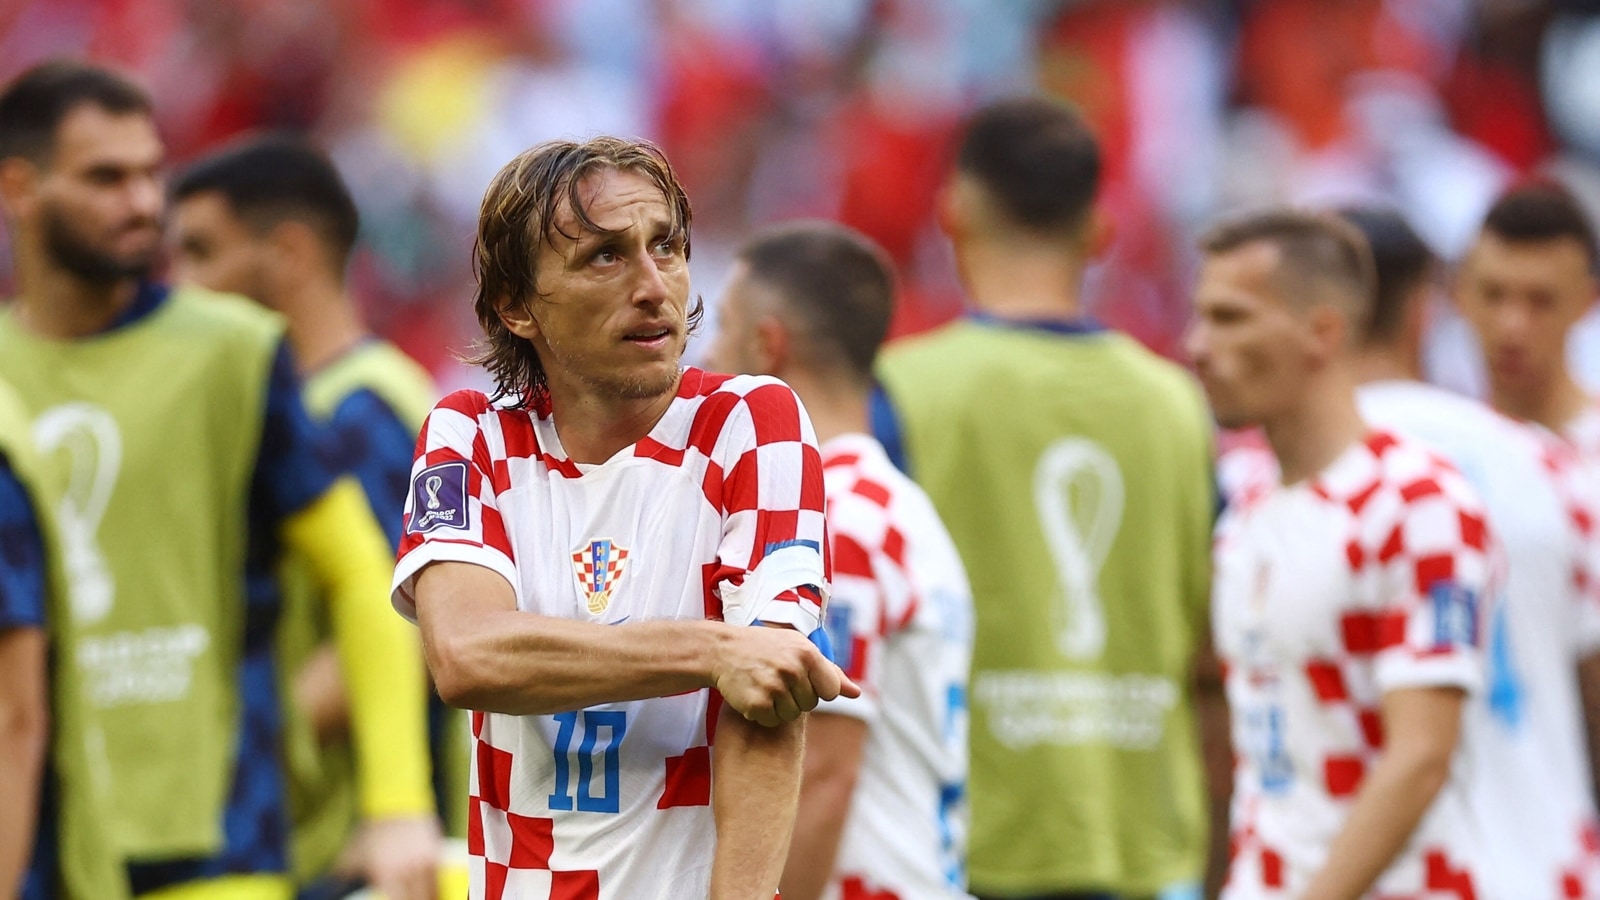 Croatia vs Canada FIFA World Cup 2022 highlights CRO come from behind to thrash CAN 4-1 Hindustan Times